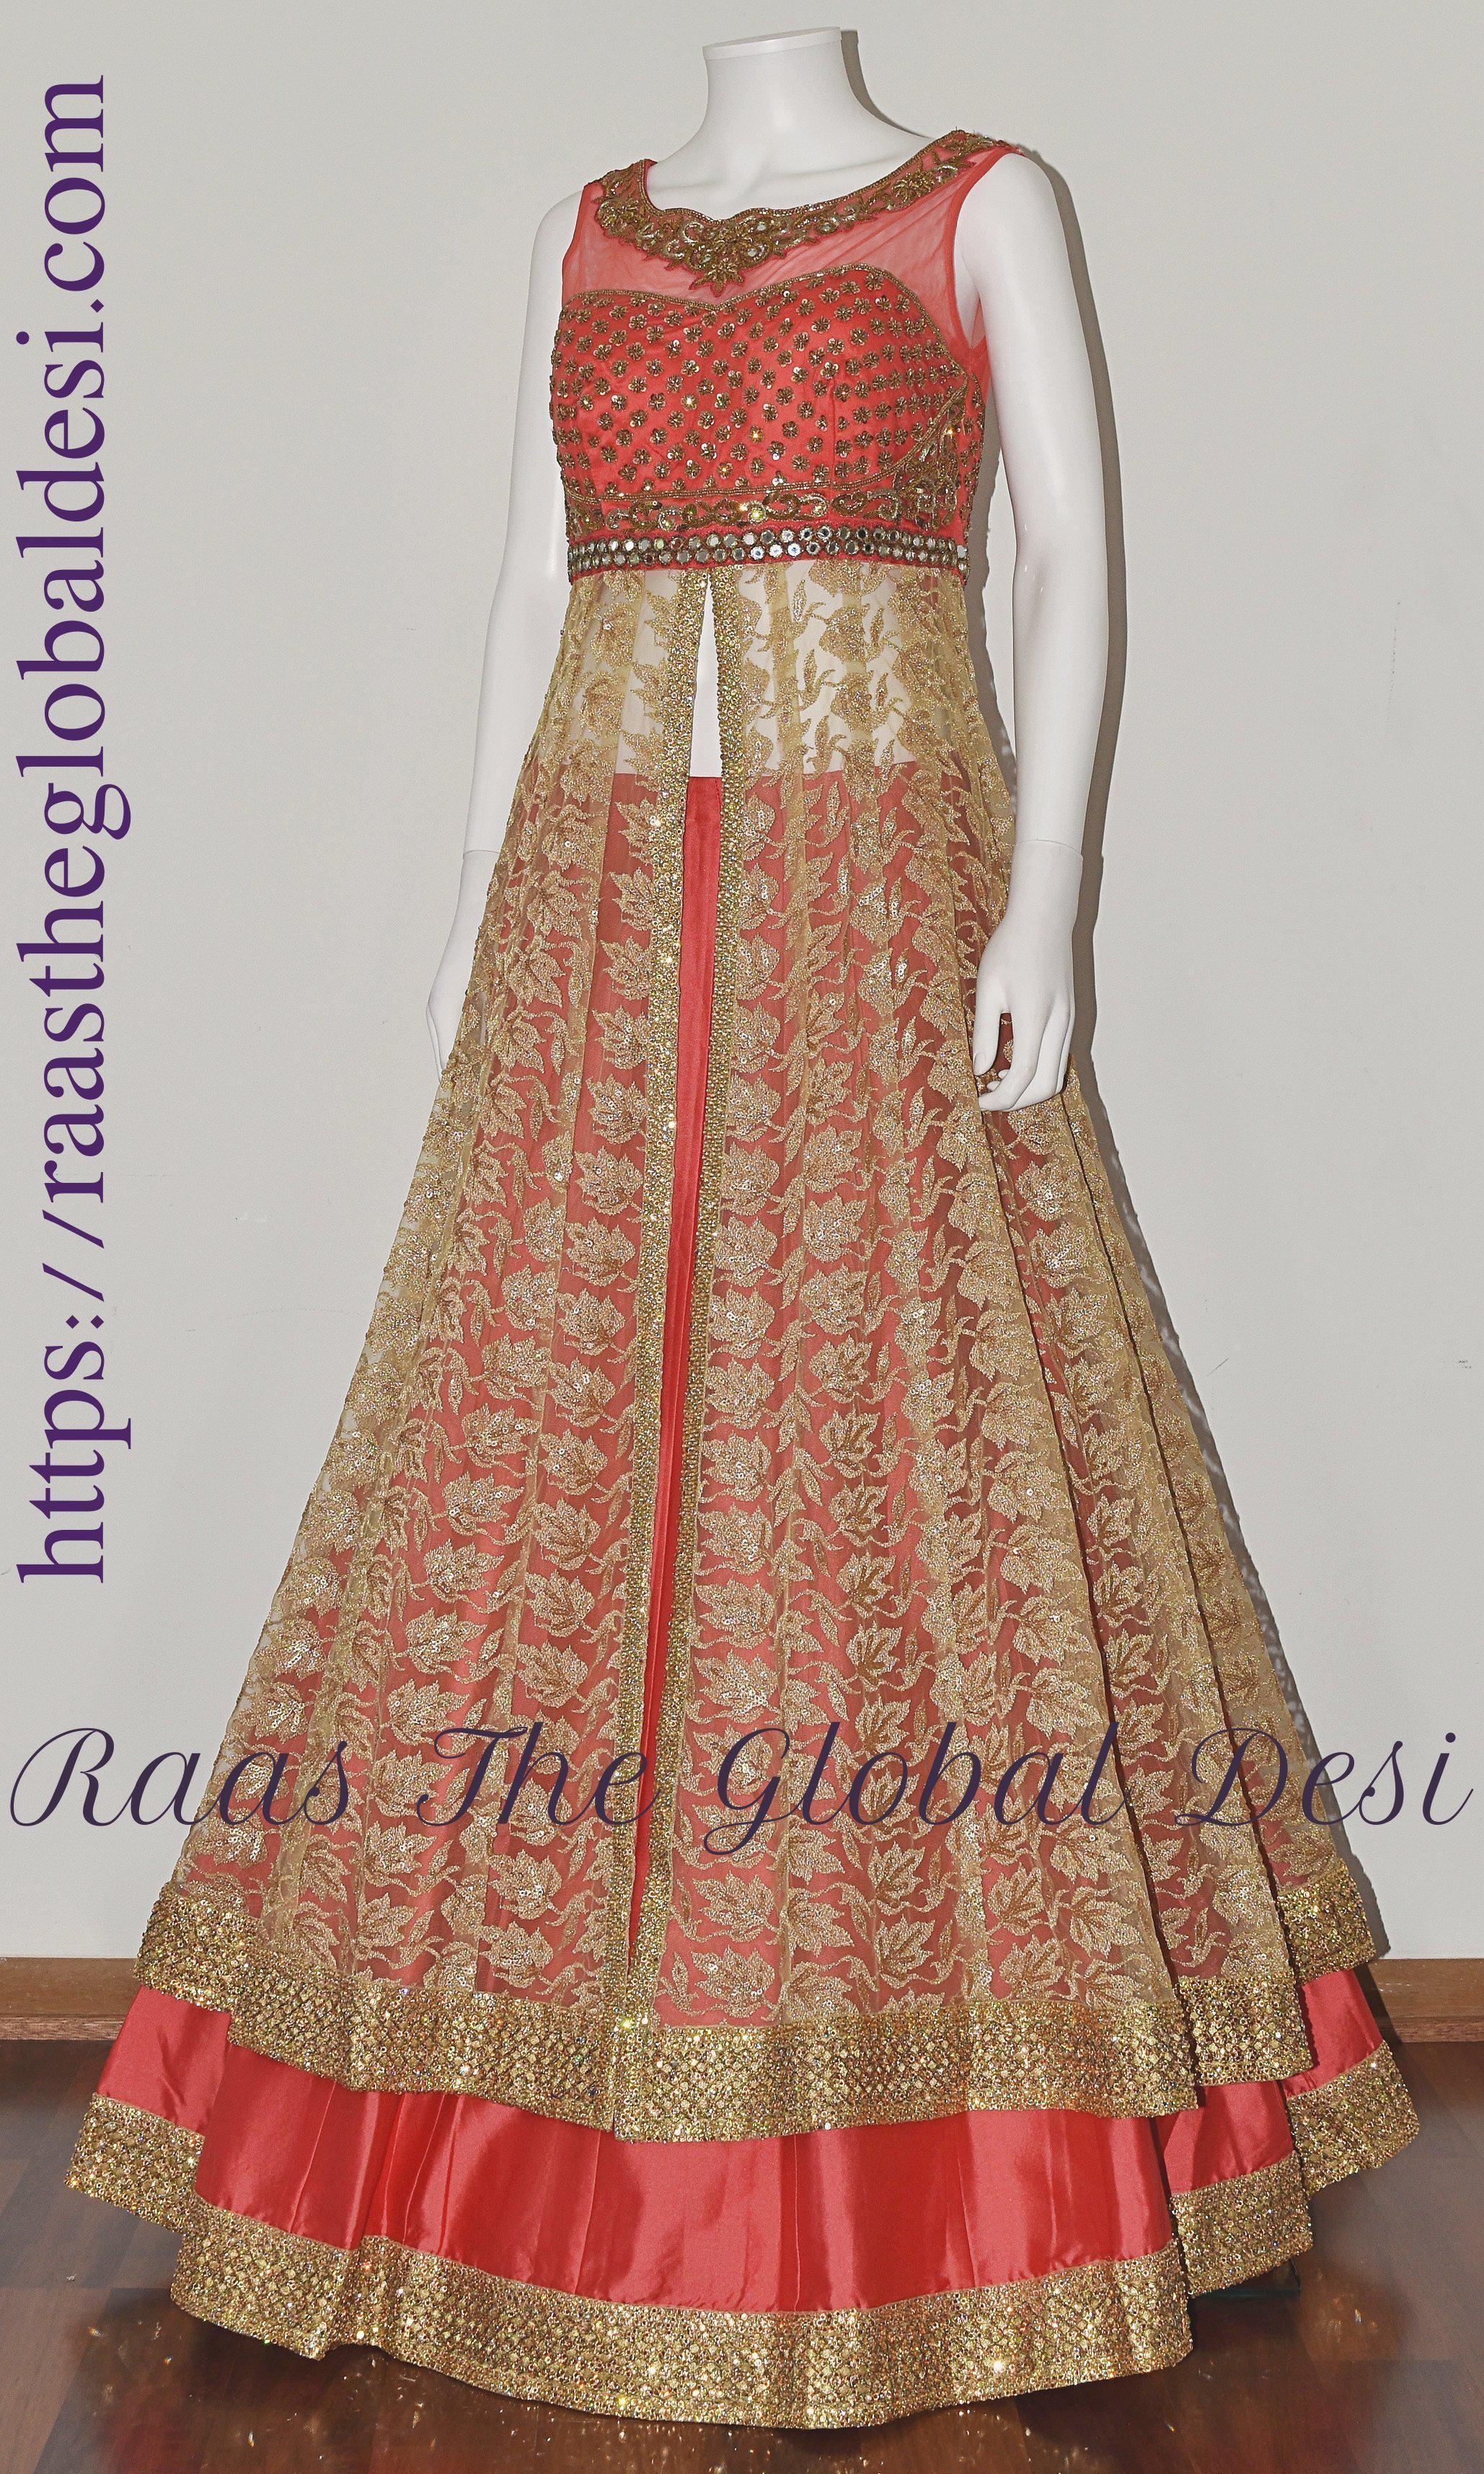 Pink and gold brocade gown by trueBrowns | The Secret Label